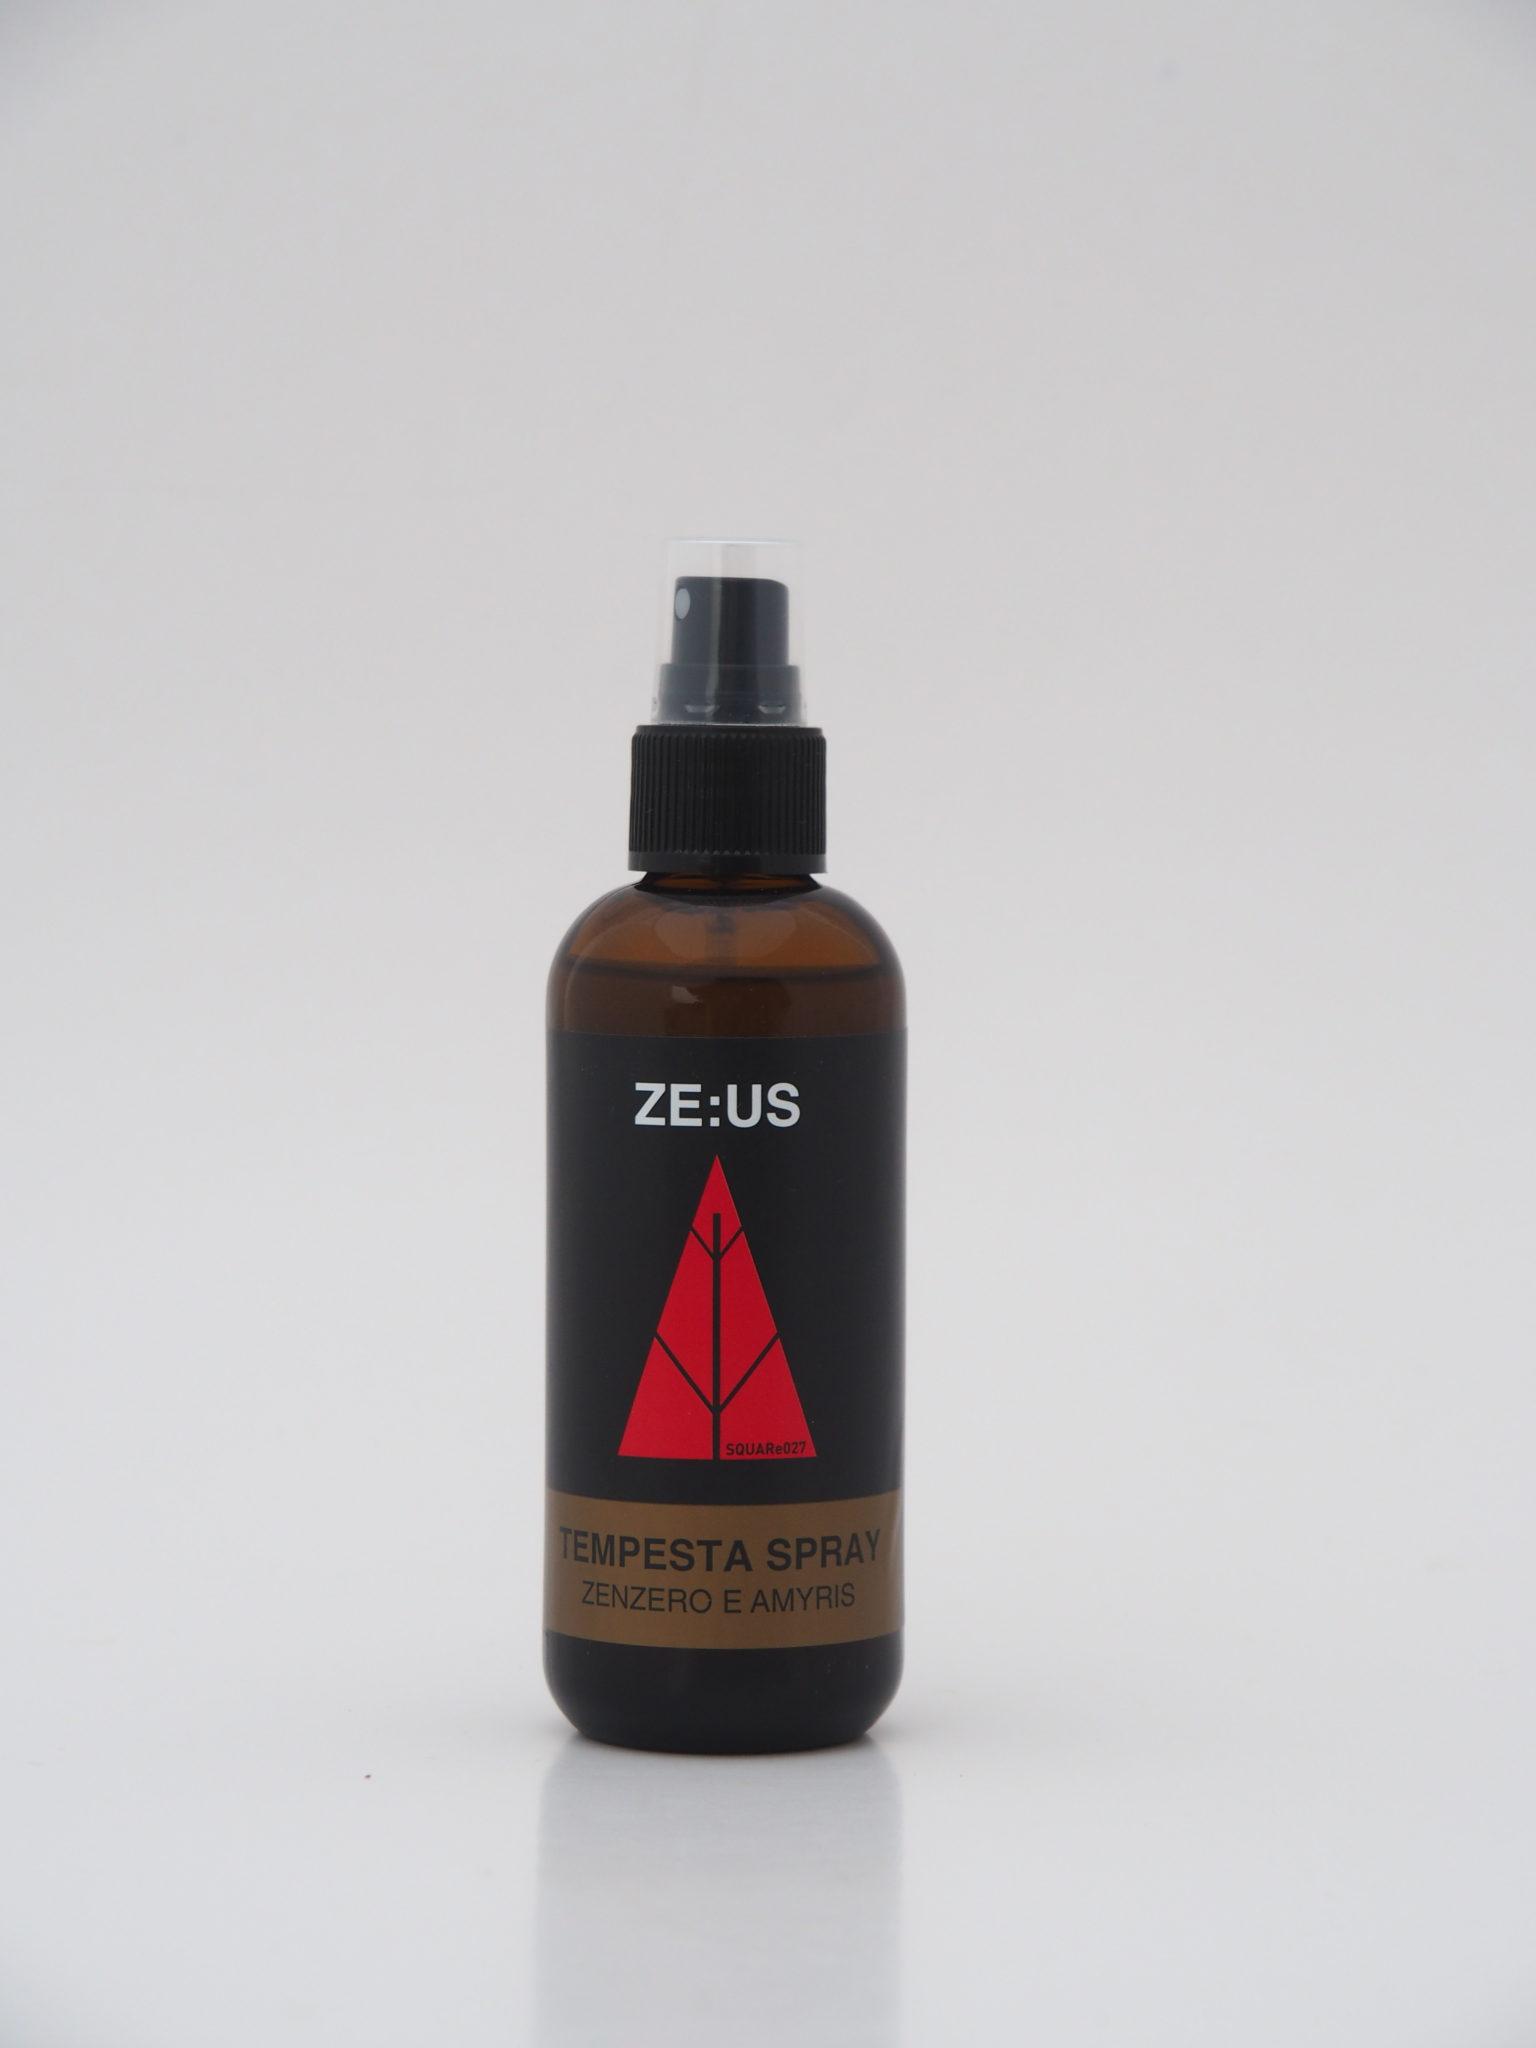 Product Ze:us Energetic spray made of ginger and amyris by SQUARe027 image